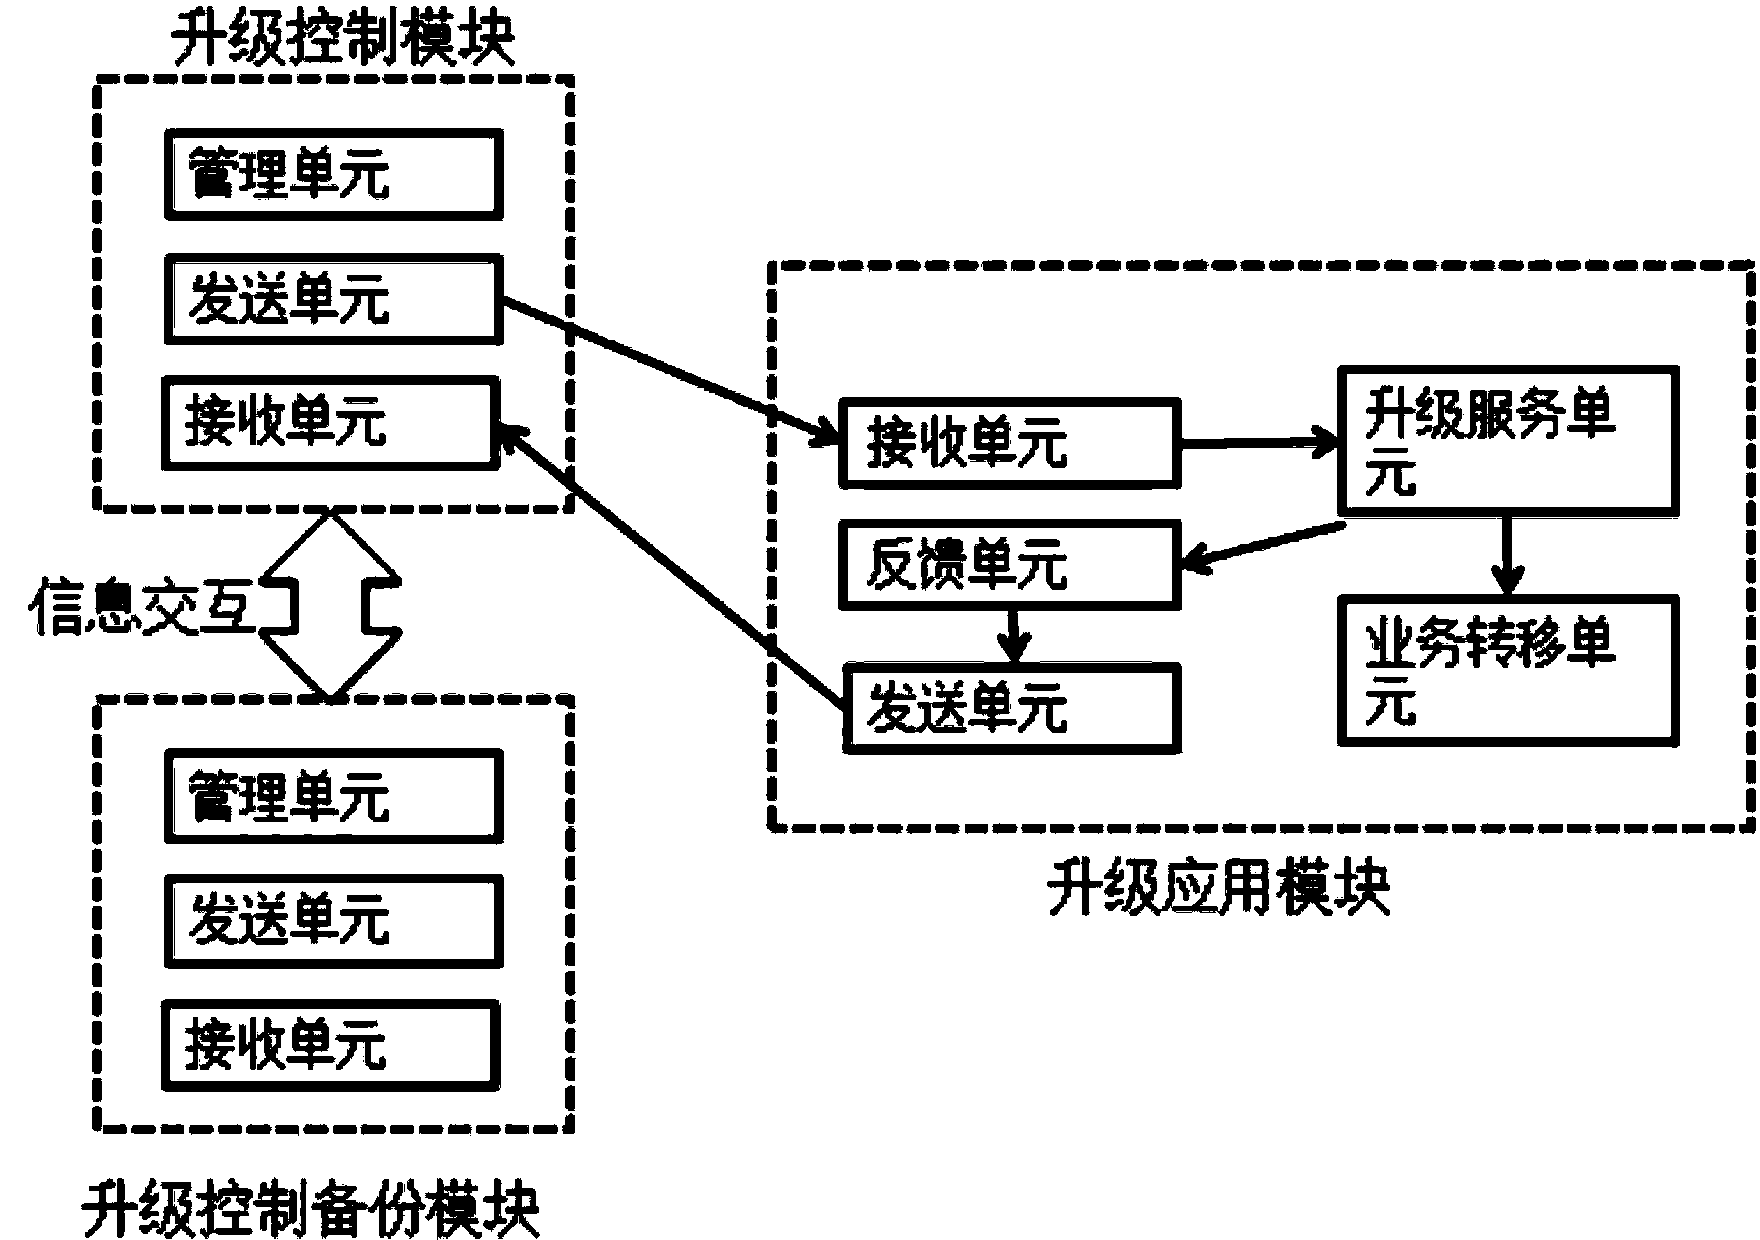 Method for online upgrading of cloud storage system firmware